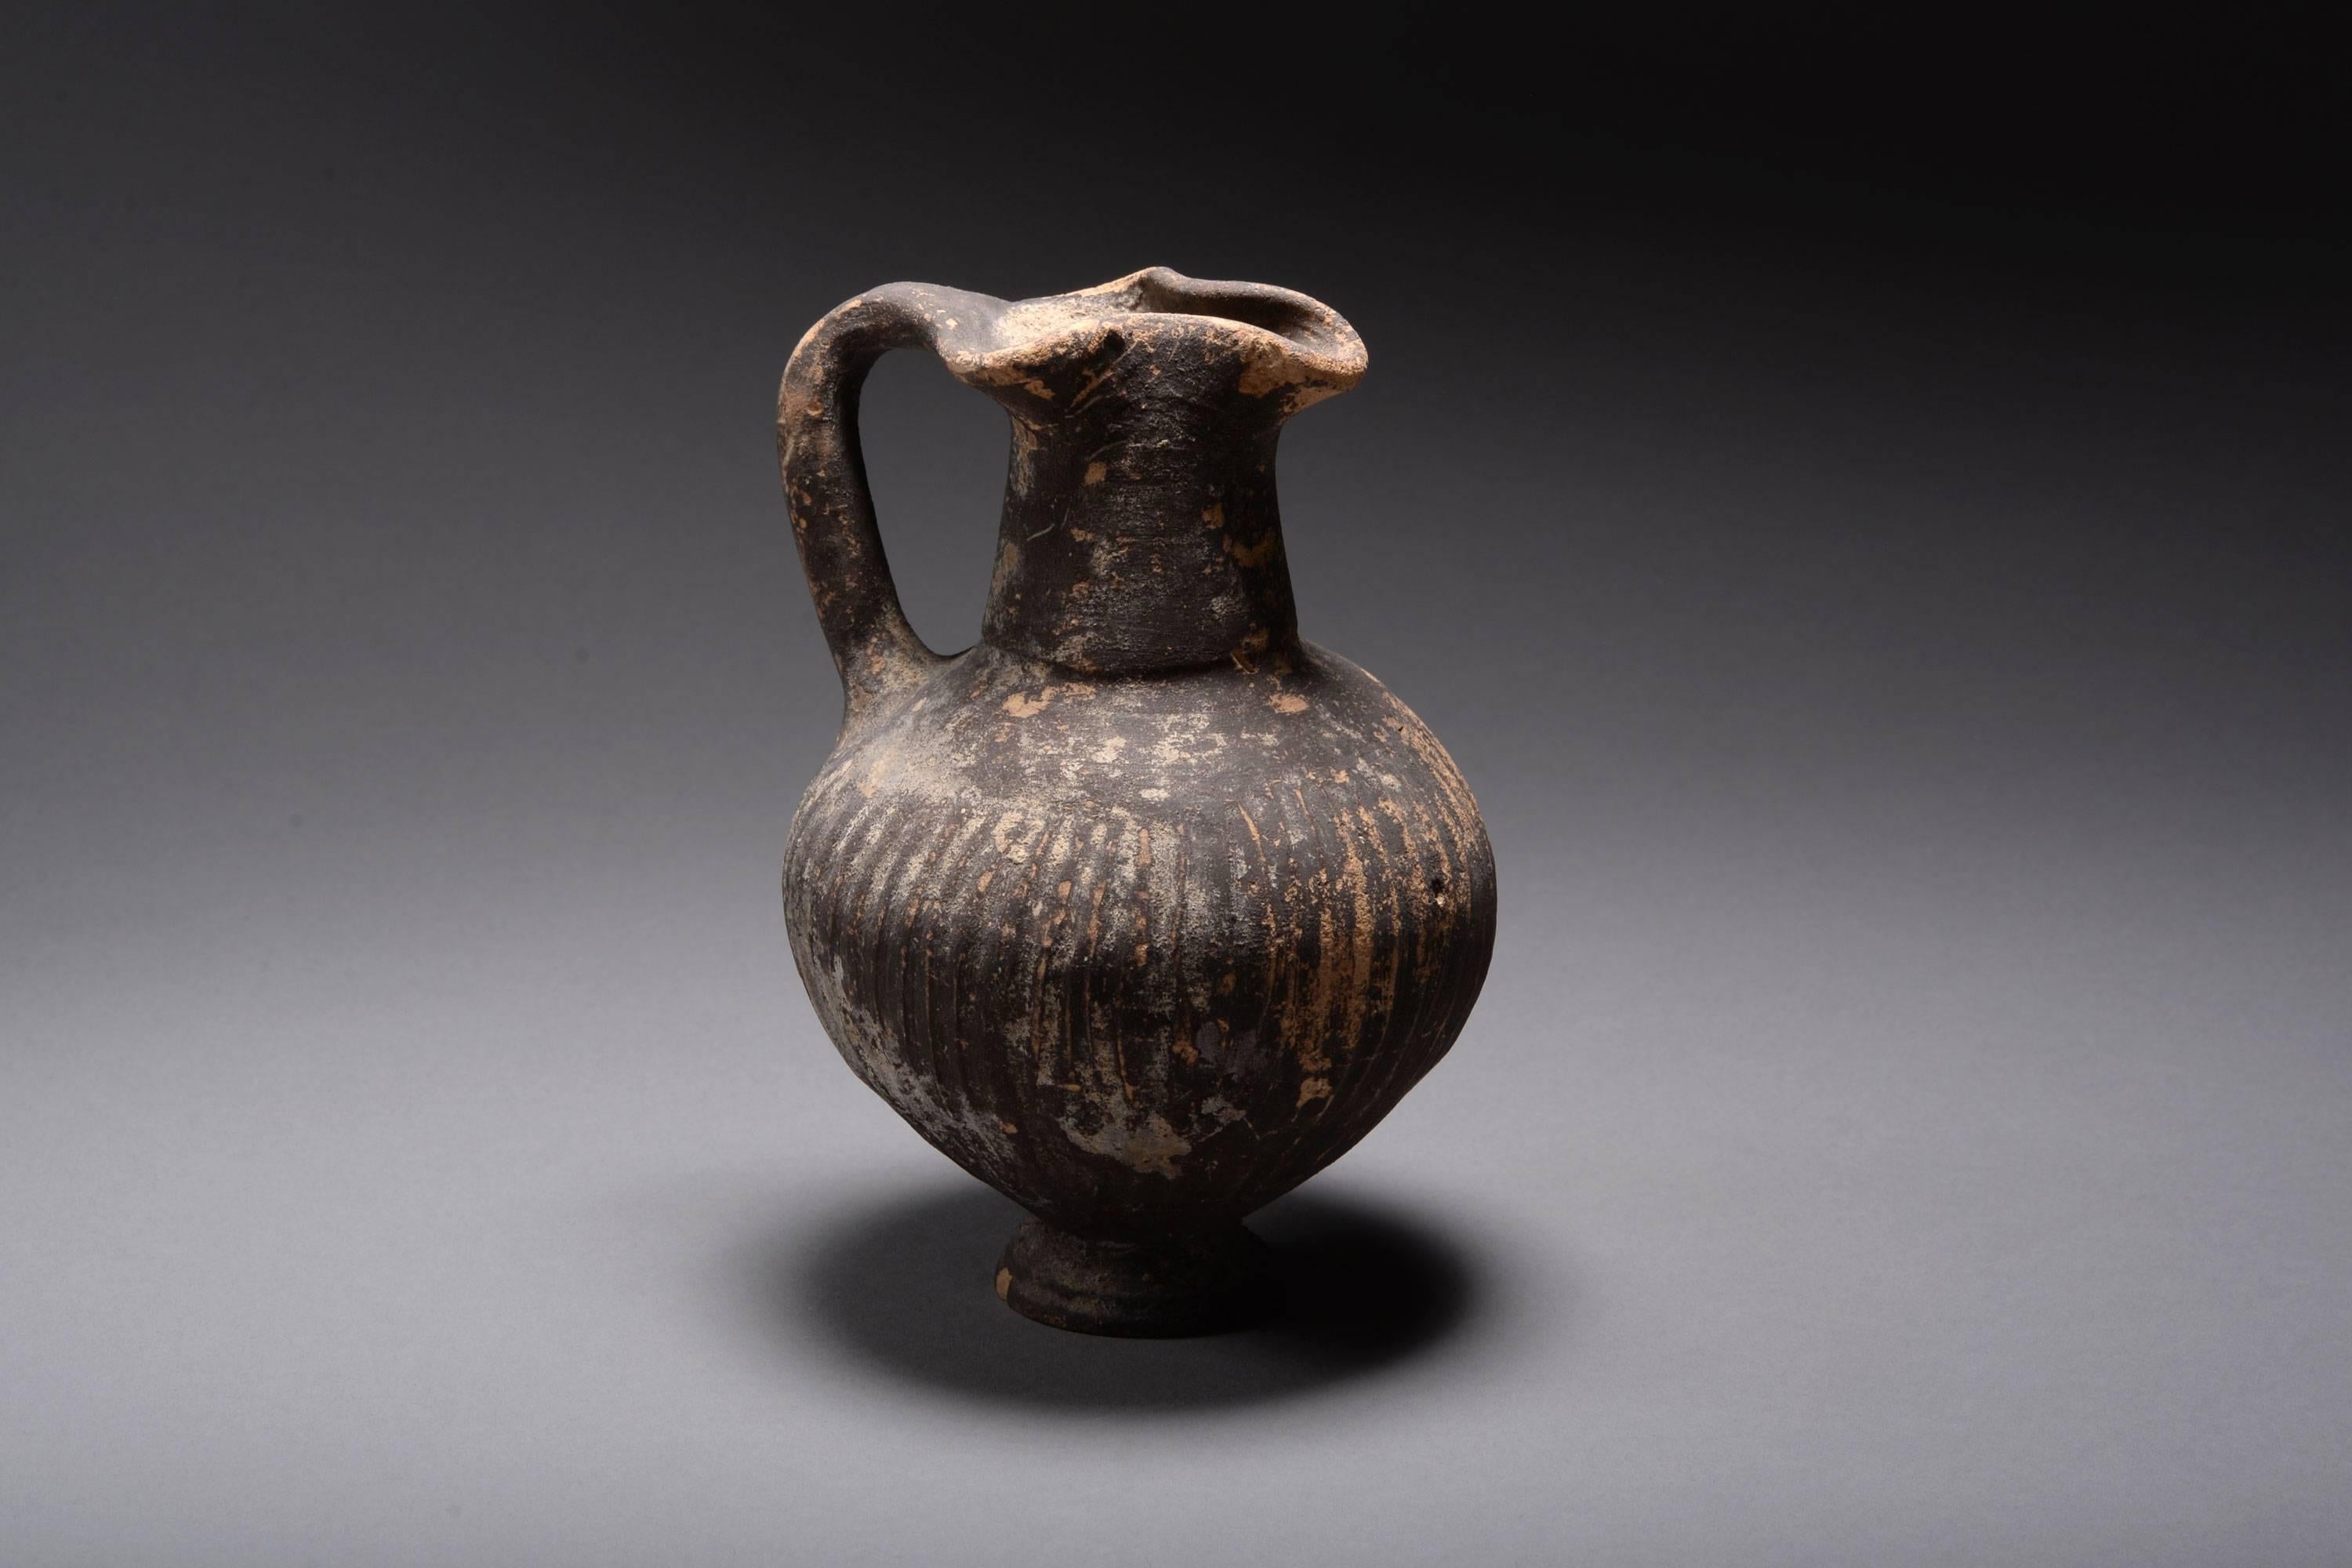 A fine example of an ancient Cypro-Geometric black slip ware jug, dating to around 950 - 800 BC.

These characteristically Cypriot vessels are sometimes referred to as black slip ware jugs. They are characterised by the globular body with grooves,